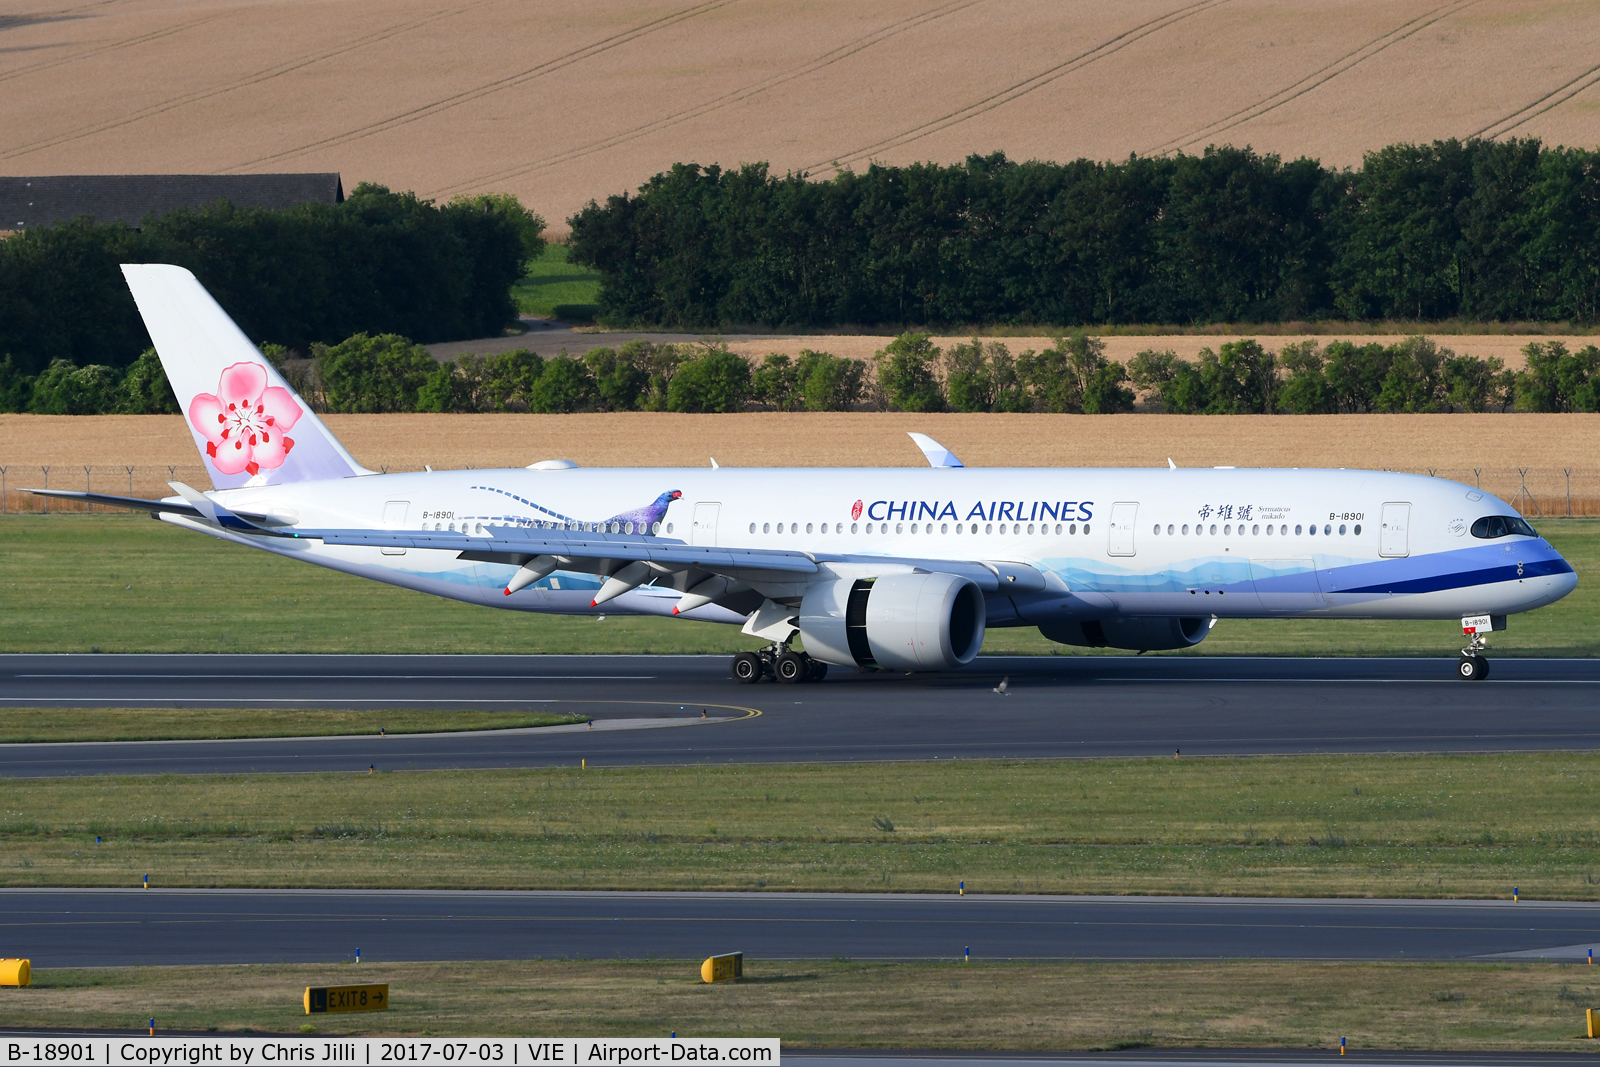 B-18901, 2016 Airbus A350-941 C/N 049, China Airlines